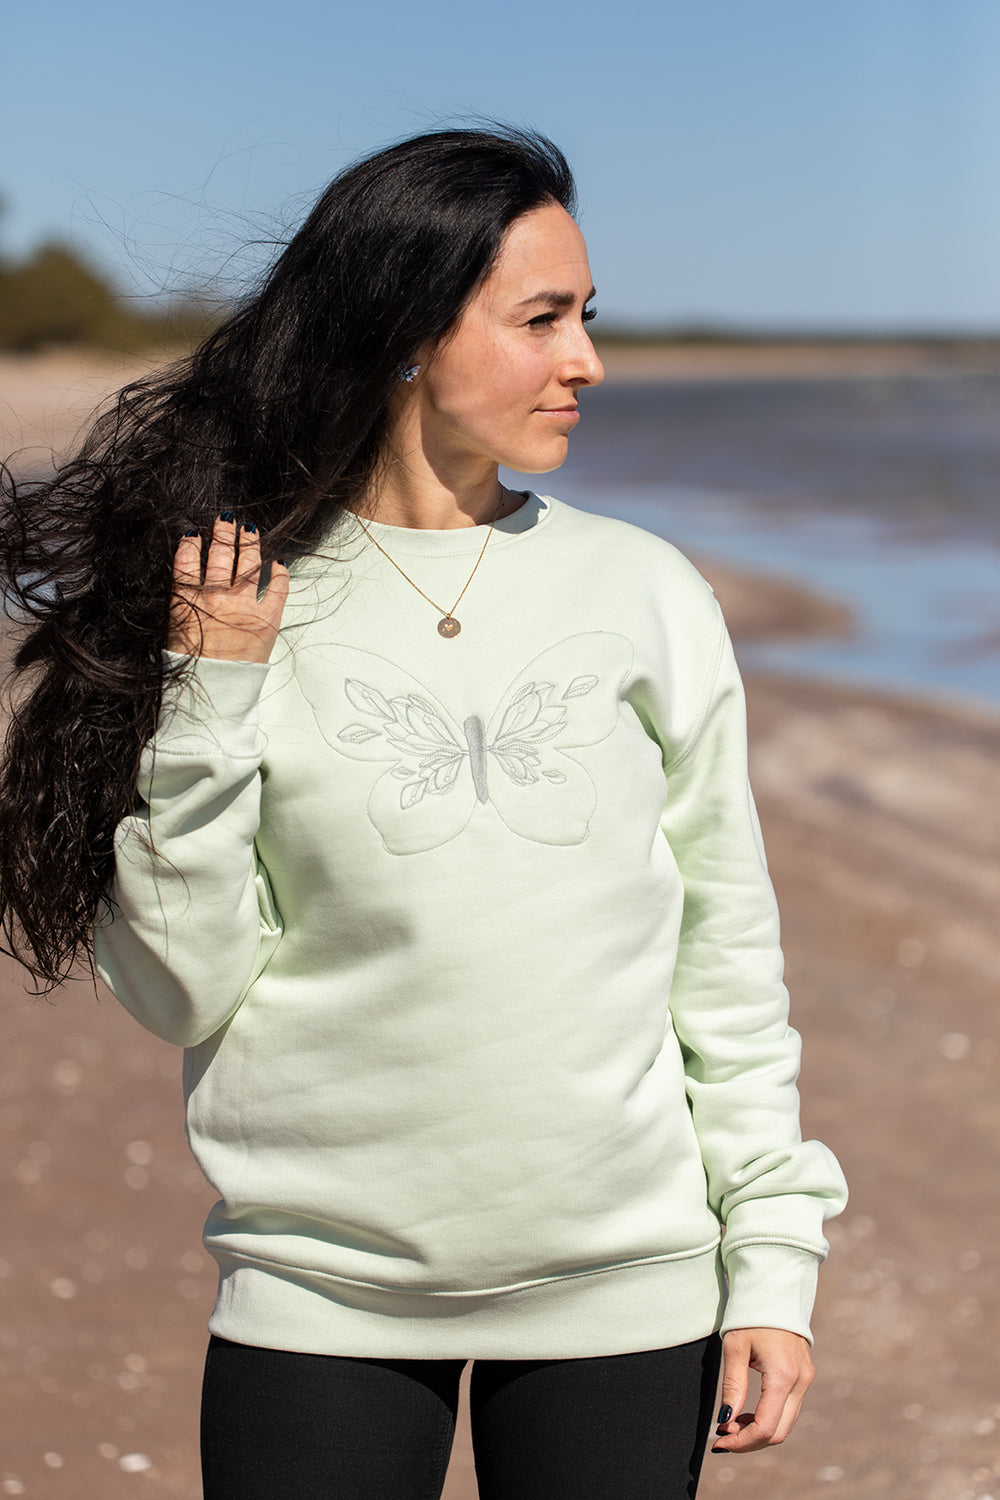 Silver Butterfly embroidered sweatshirt (light green)